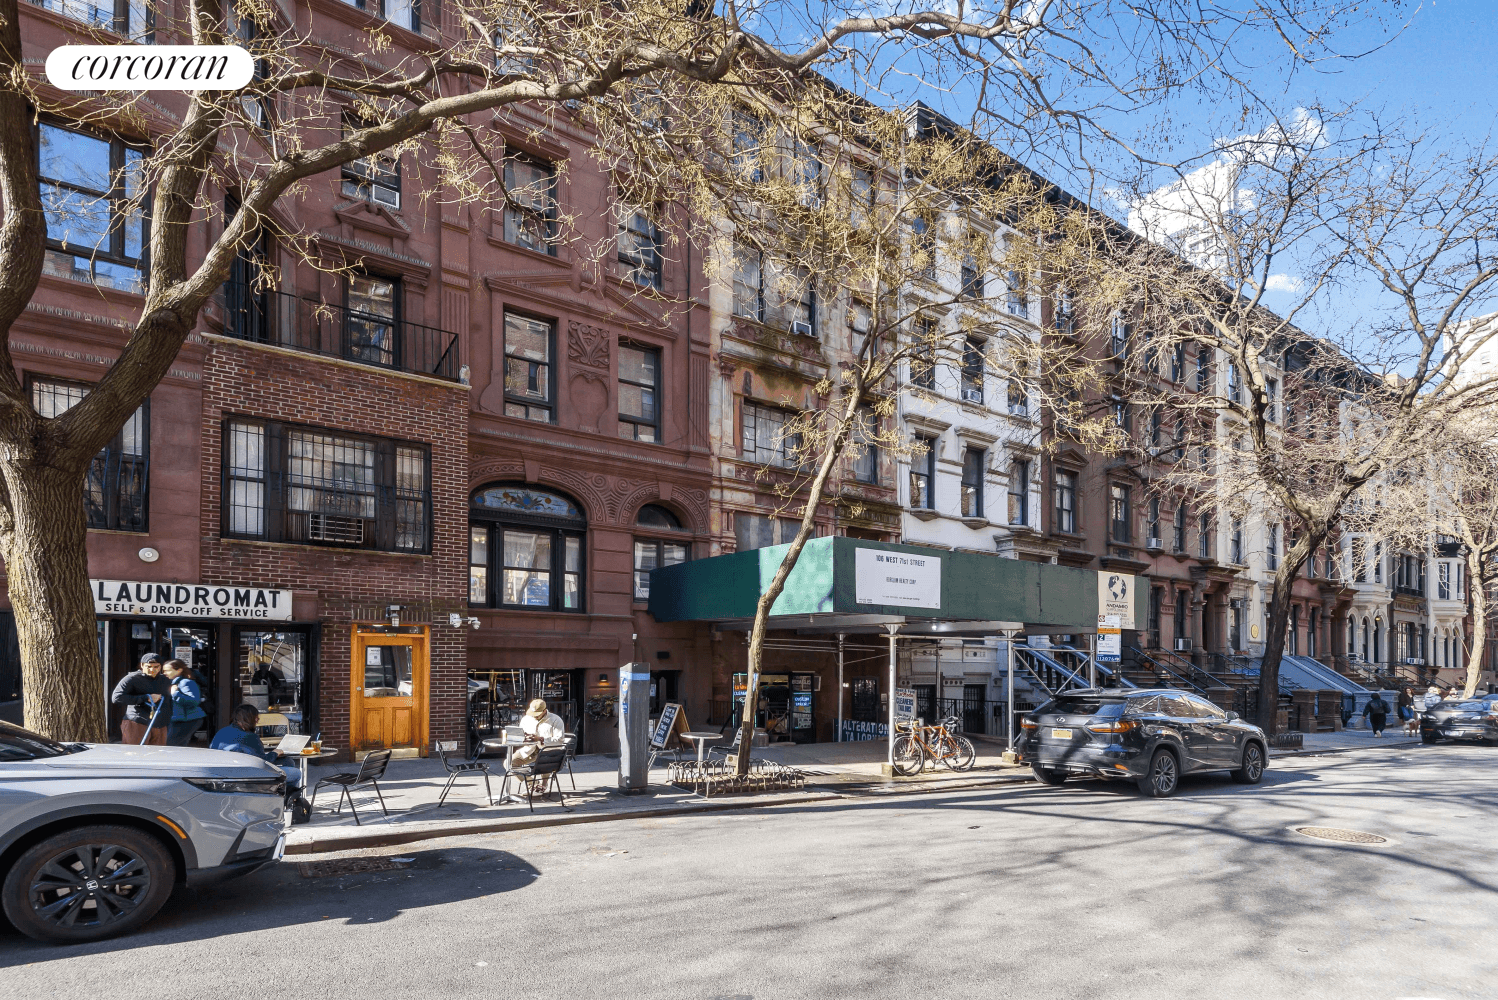 We are pleased to present the exclusive sale of 114 West 71st street, a Ten 10 unit mixed use investment property located at 114 West 71st street in New York, ...